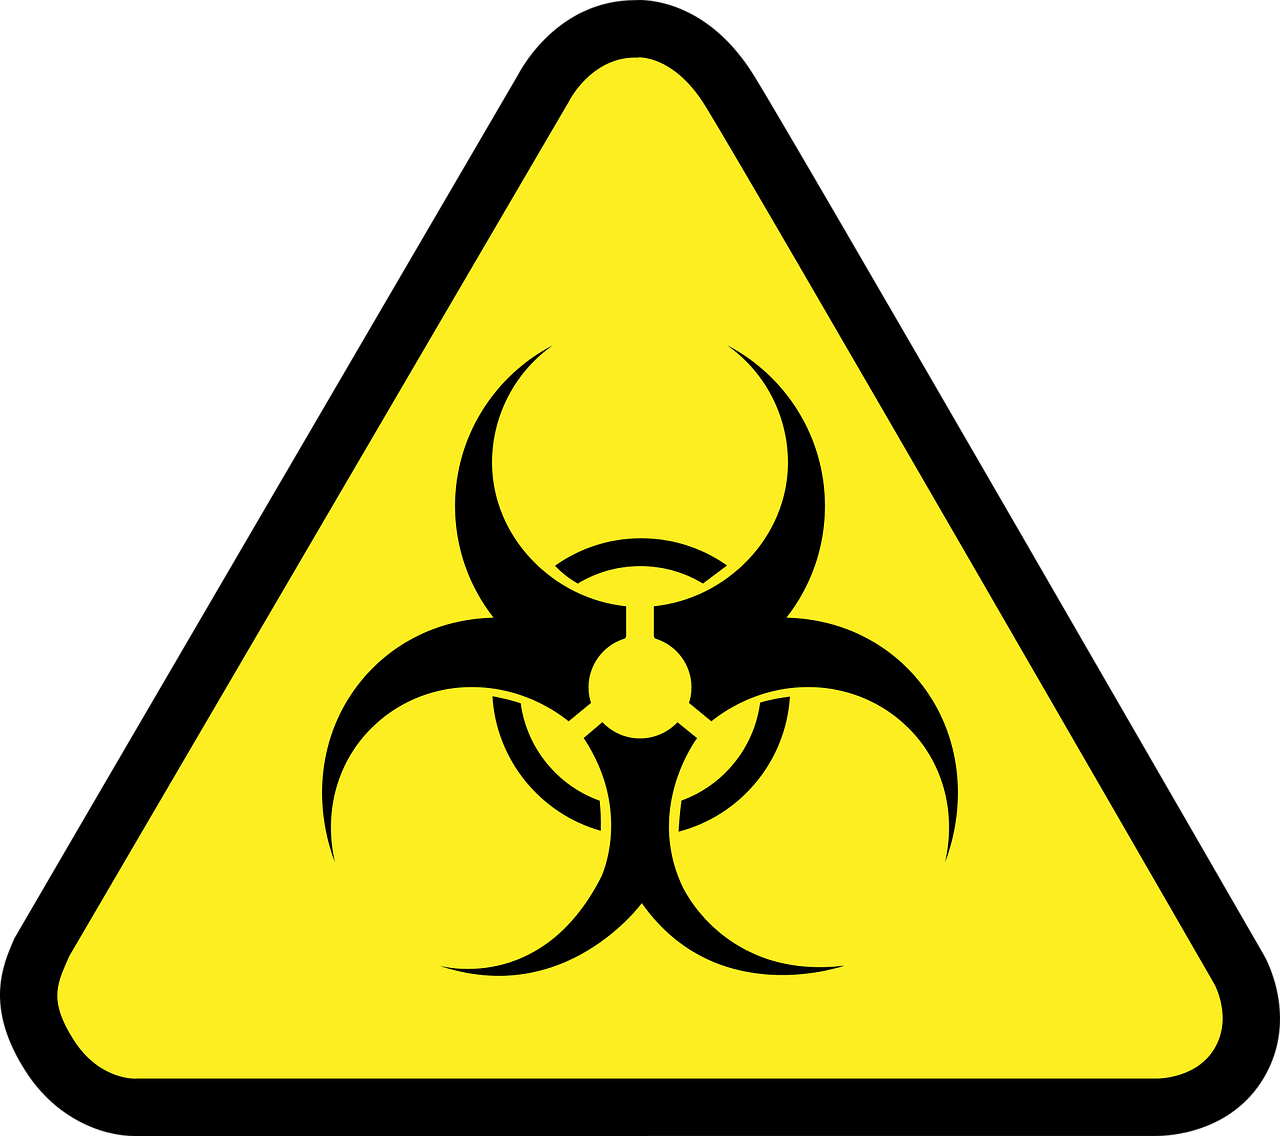 a black and yellow biohazard sign on a black background, an illustration of, organic, graphic illustration, maniacal, world